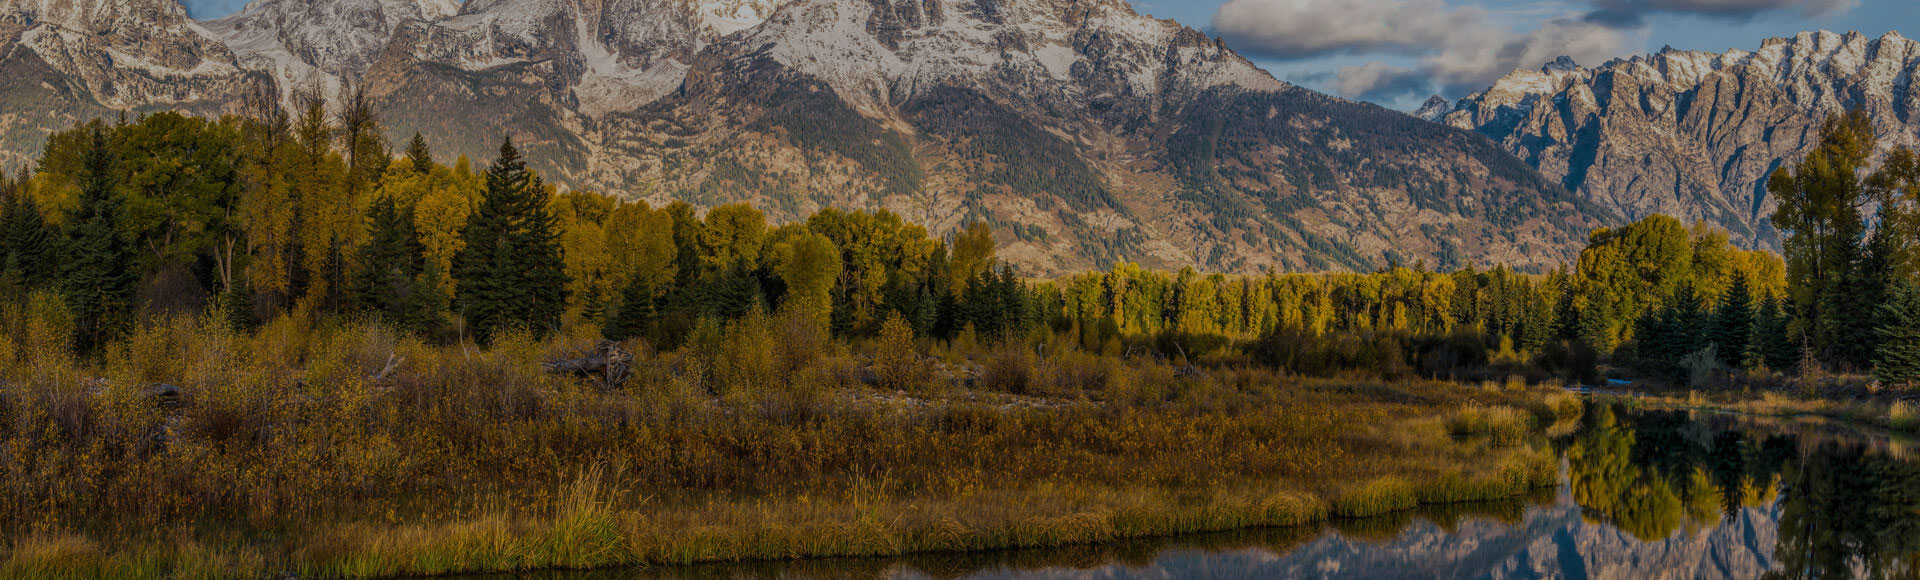 Autumn Teton Mountain scene in Wyoming with Snake River in foreground